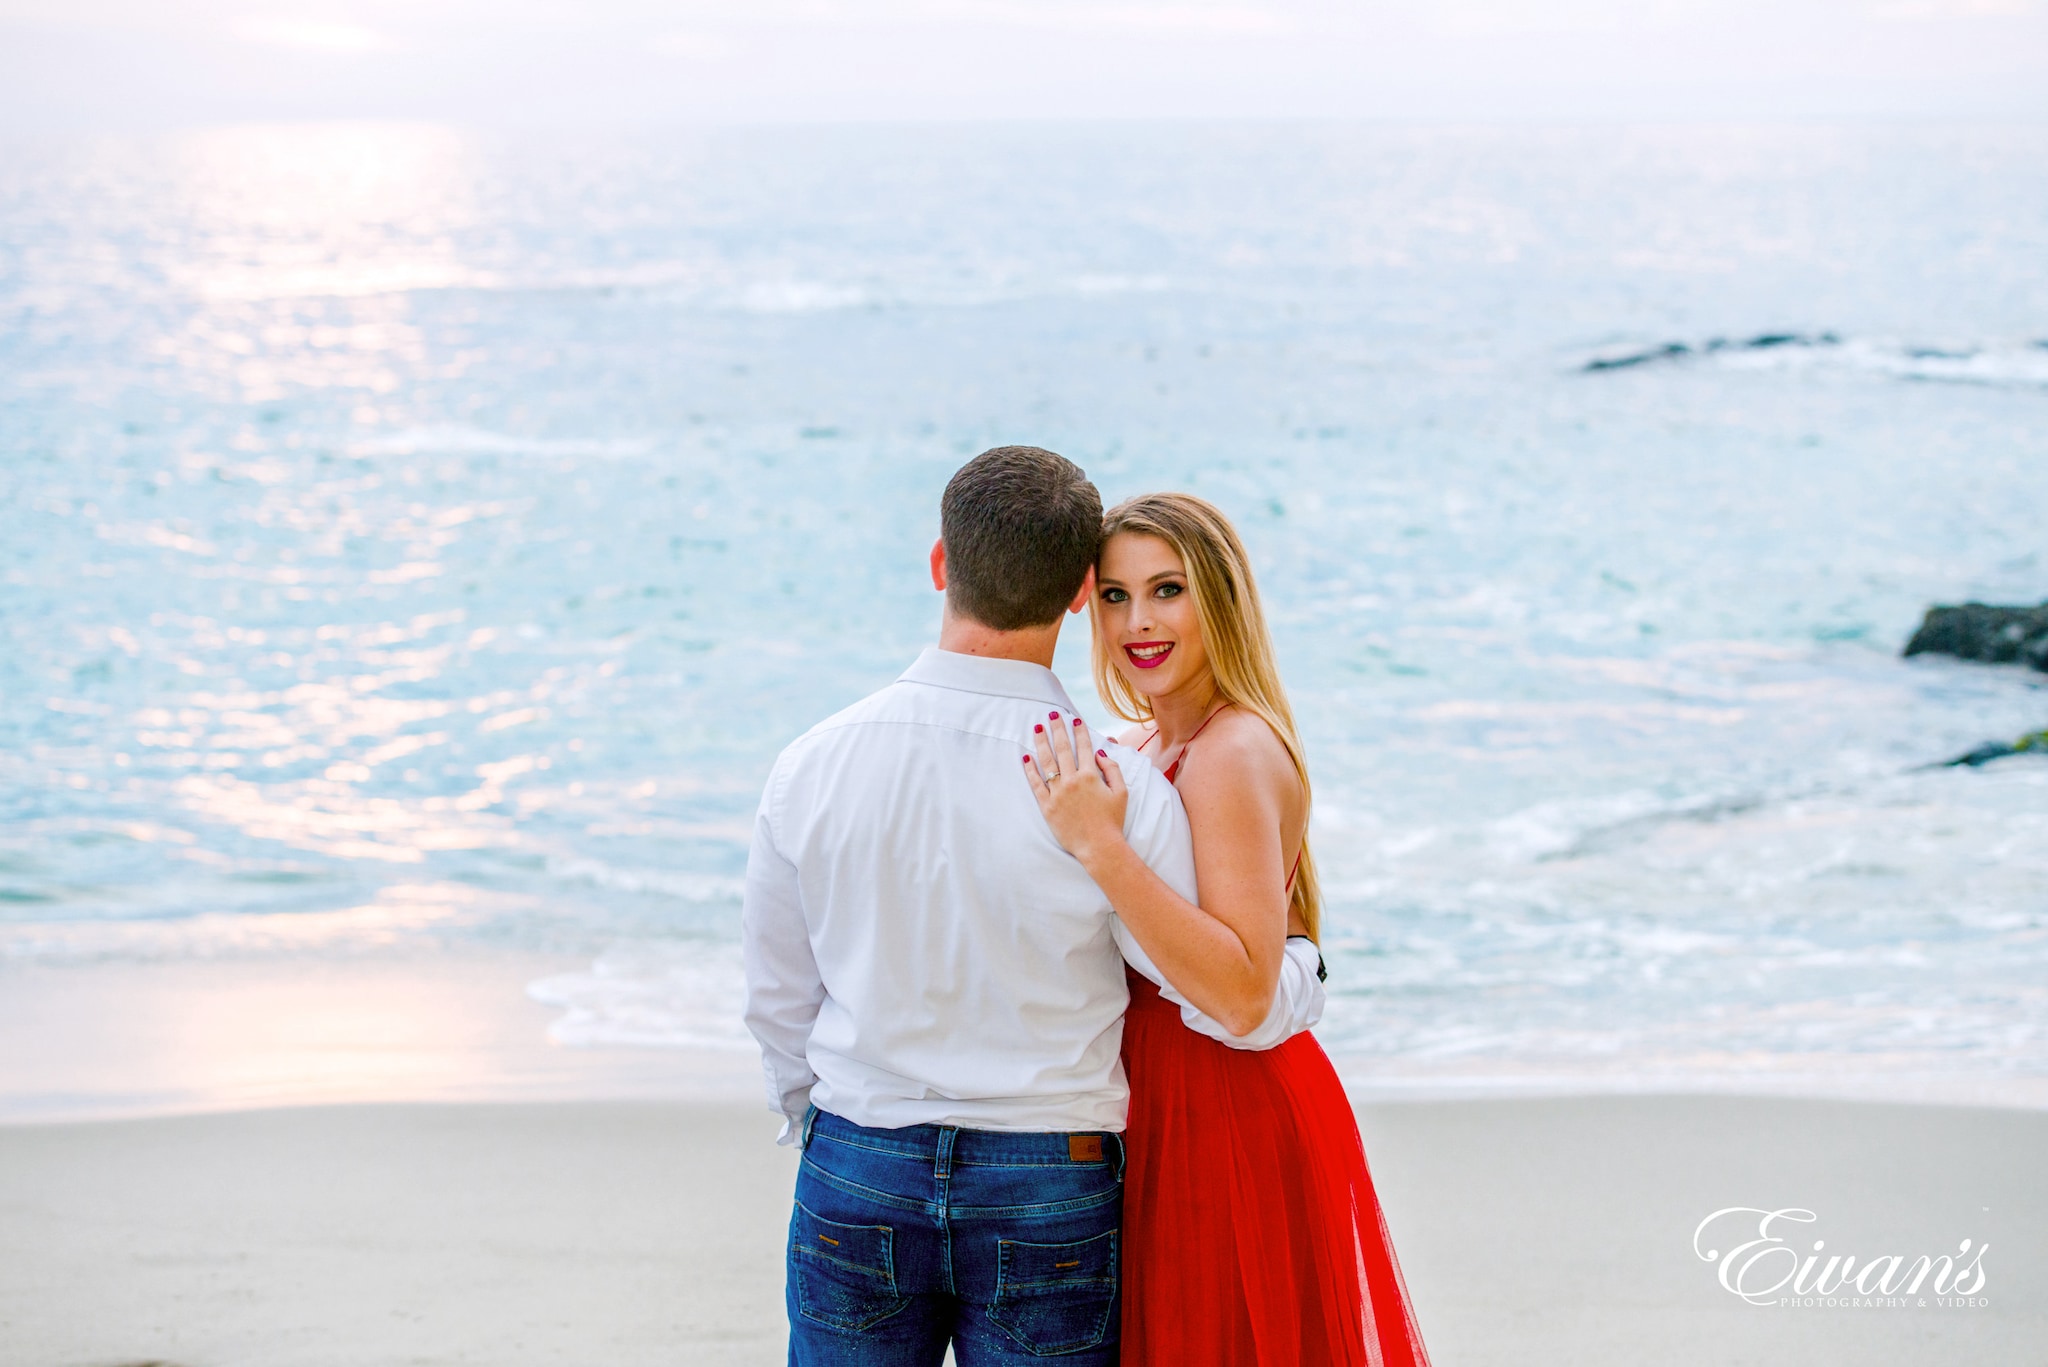 man in white dress shirt kissing woman in red dress on beach during daytime